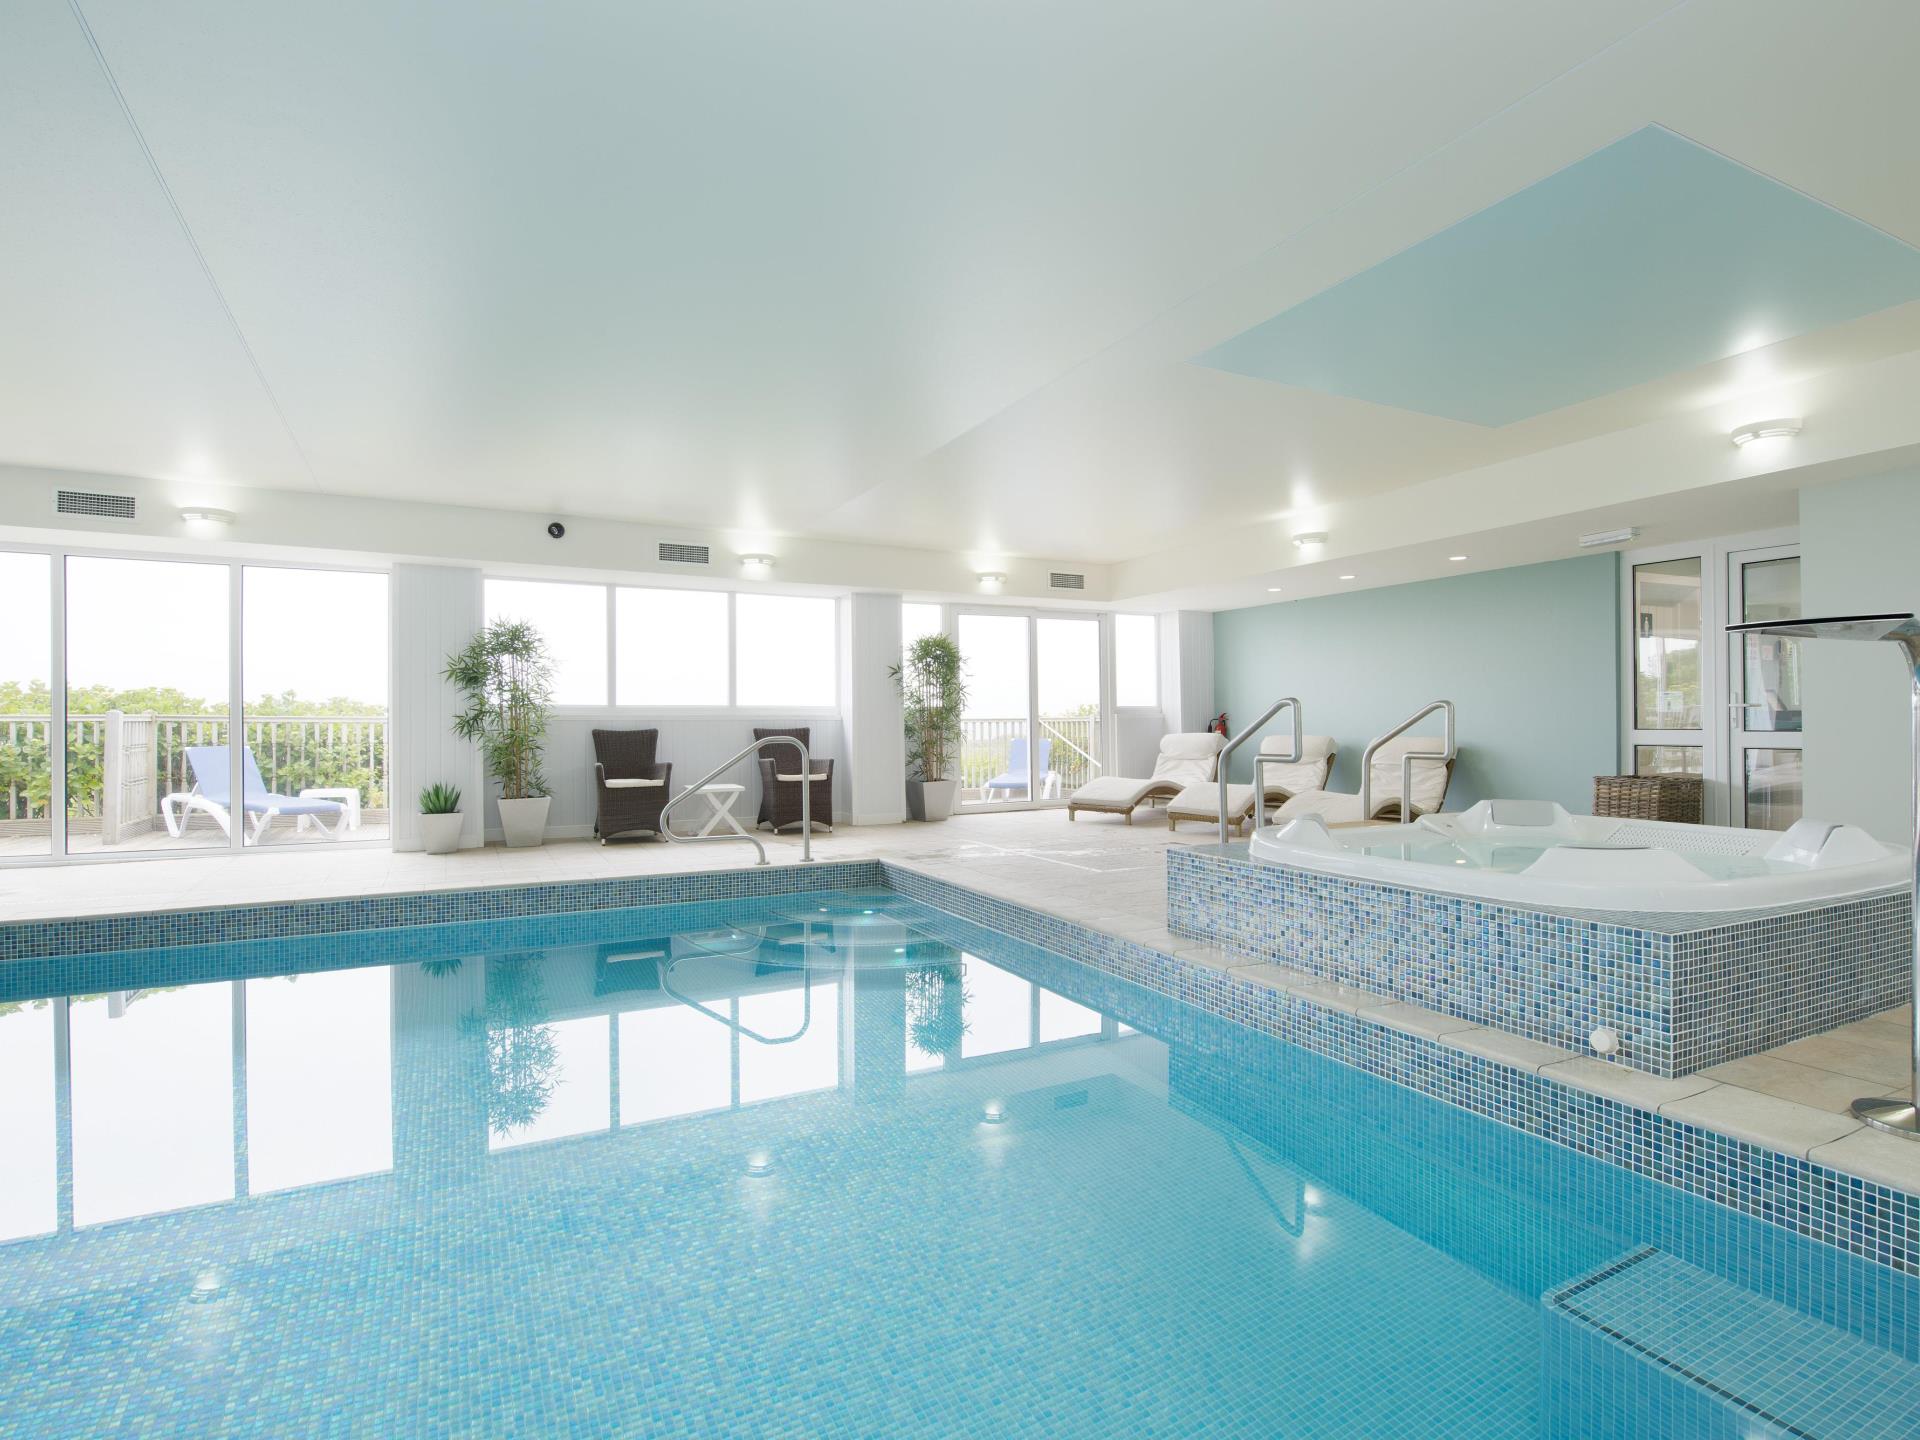 Take a swim and relax in the spa bath